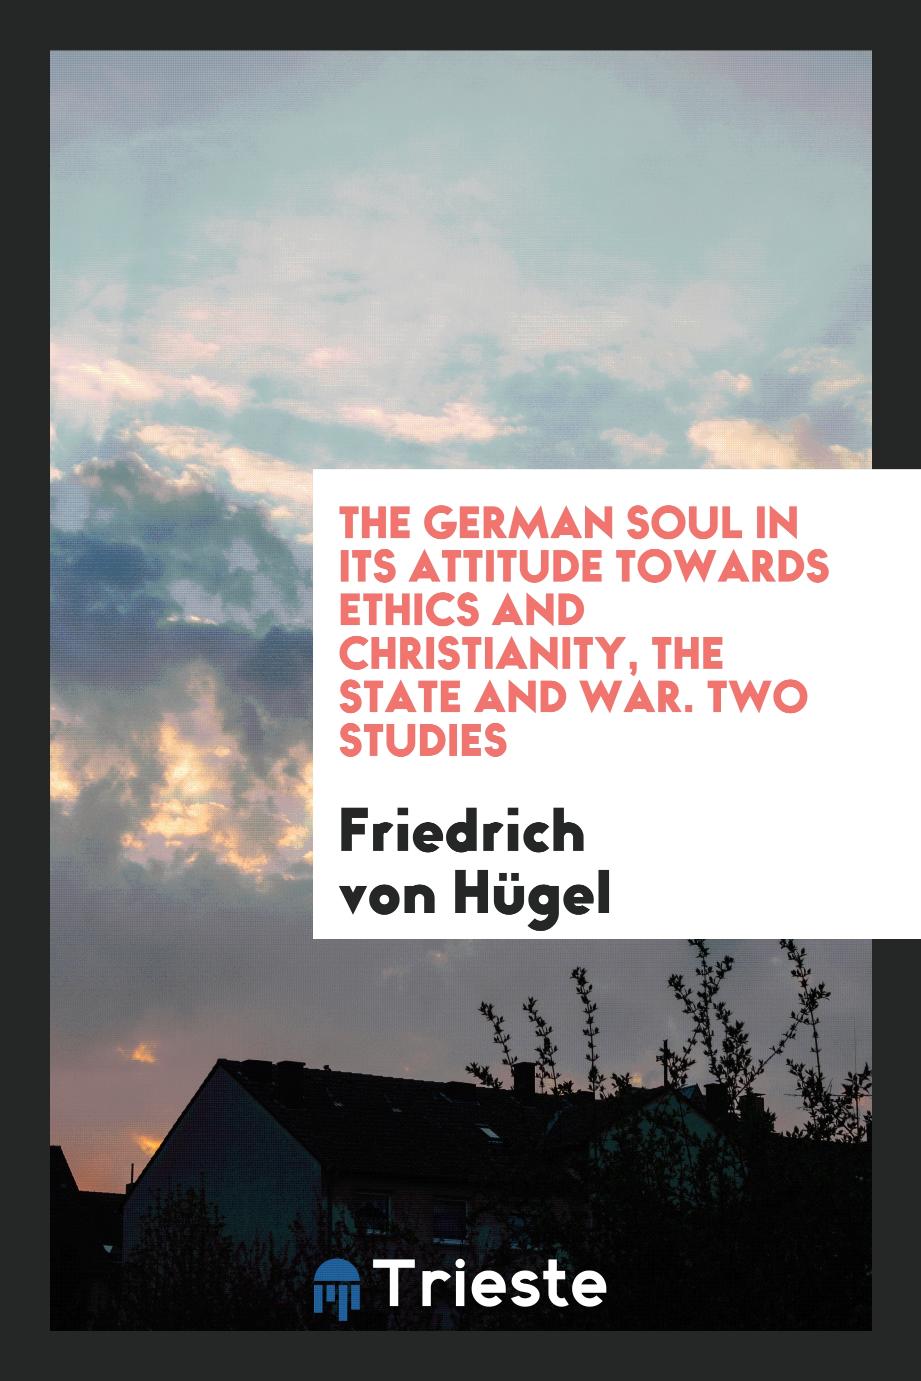 The German Soul in Its Attitude Towards Ethics and Christianity, the State and War. Two Studies